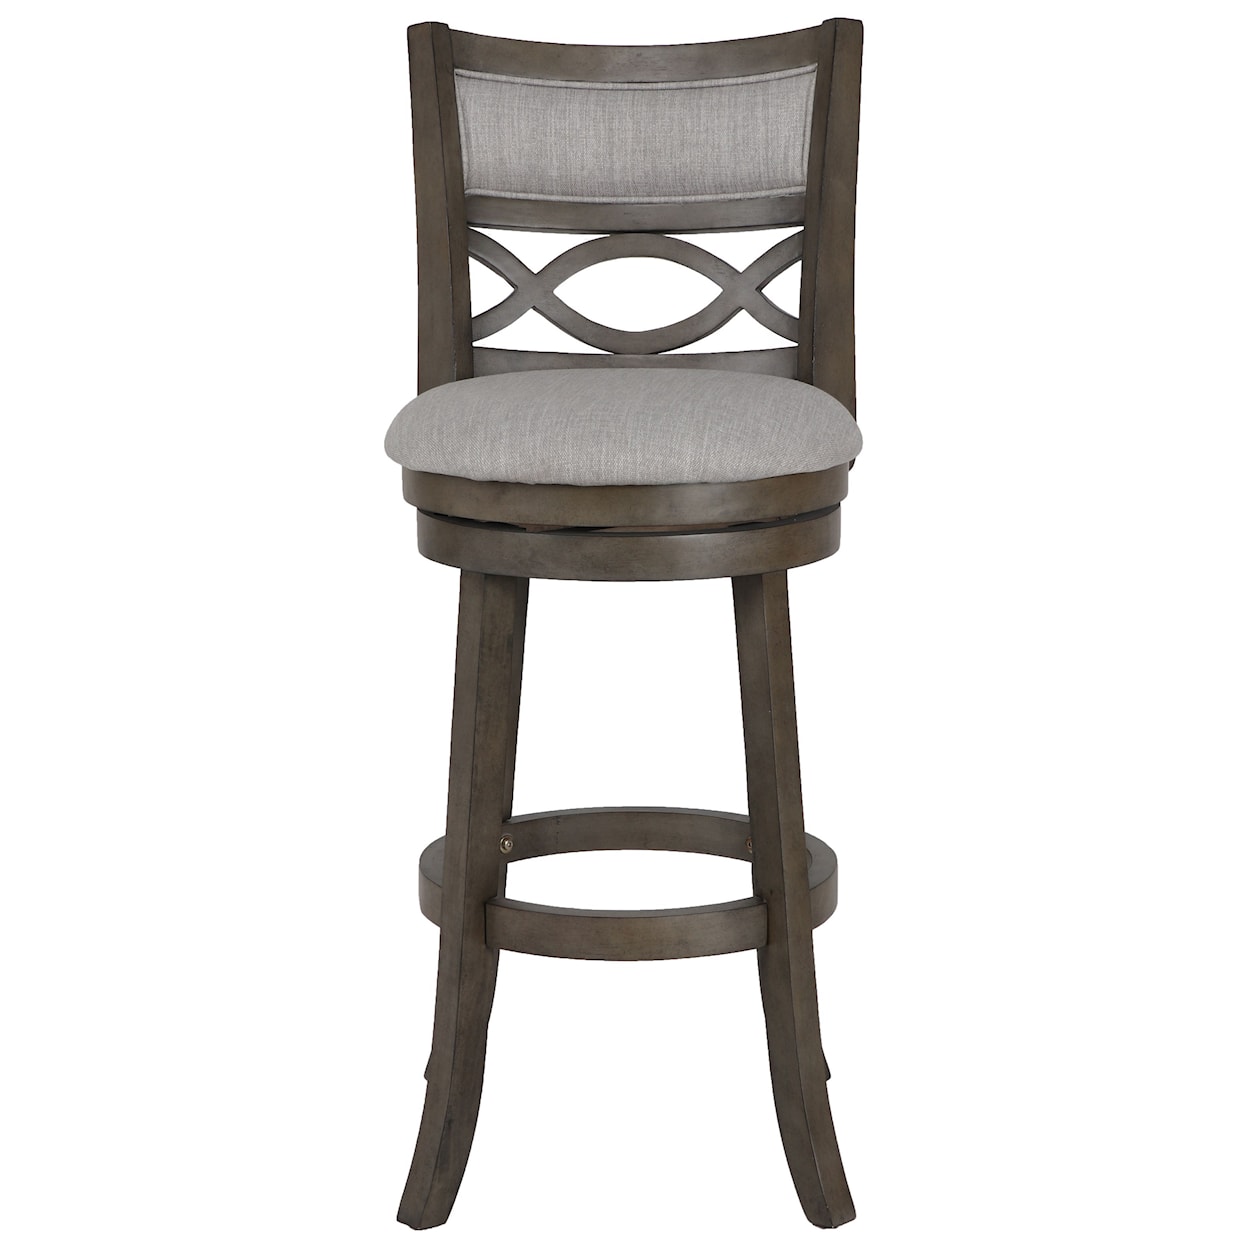 New Classic Manchester 29" Barstool with Fabric Seat